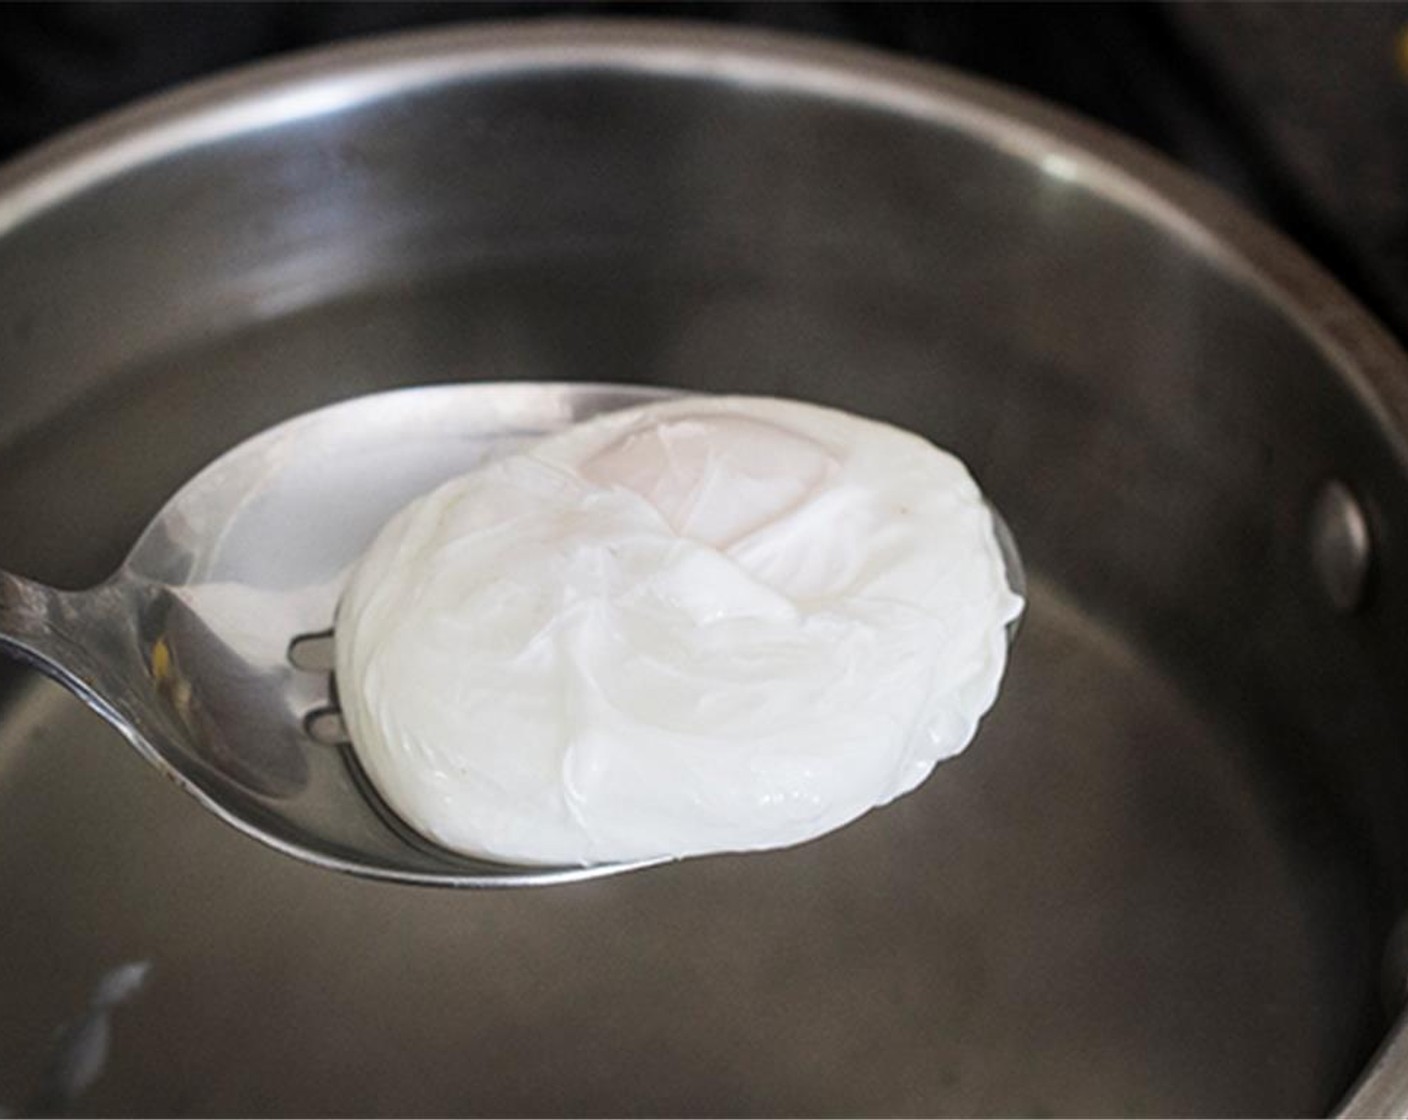 step 11 Do this again with the second egg.  Cover the pan with a lid and let it cook for 3 minutes (no peeking!)  Once cooked, use a slotted spoon to gently lift the eggs out of the water. Transfer to a paper towel to drain.